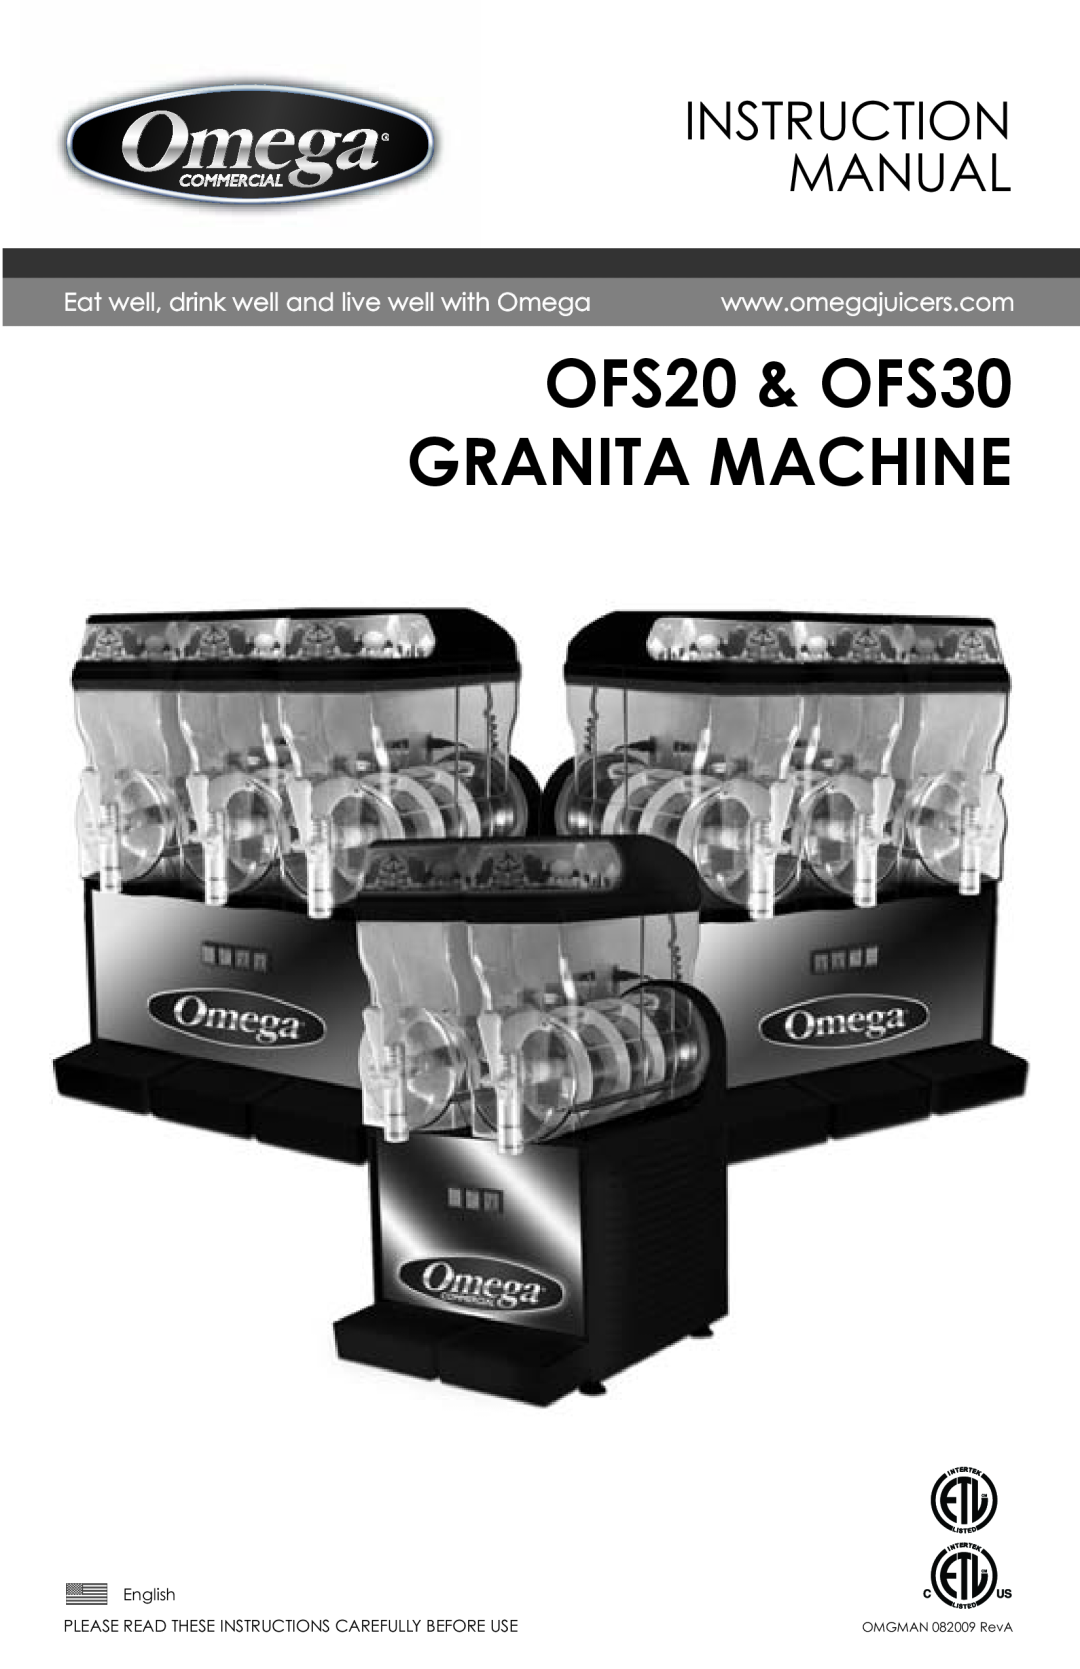 Omega instruction manual OFS20 & OFS30 GRANITA MACHINE, Eat well, drink well and live well with Omega 